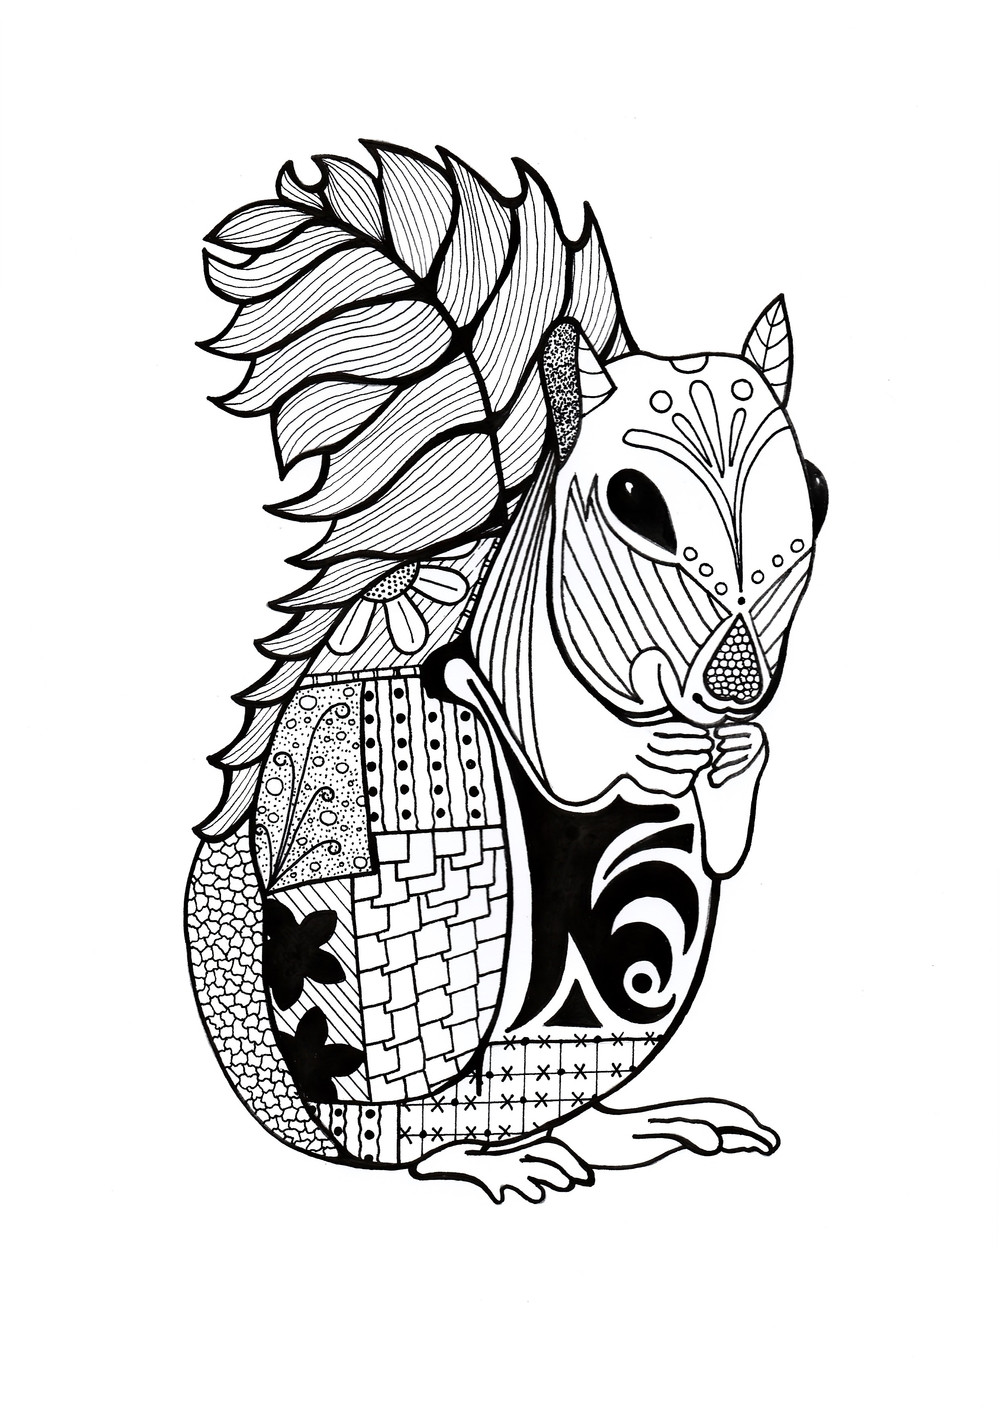 Coloring Pages For Adults Animals
 Intricate Squirrel Adult Coloring Page